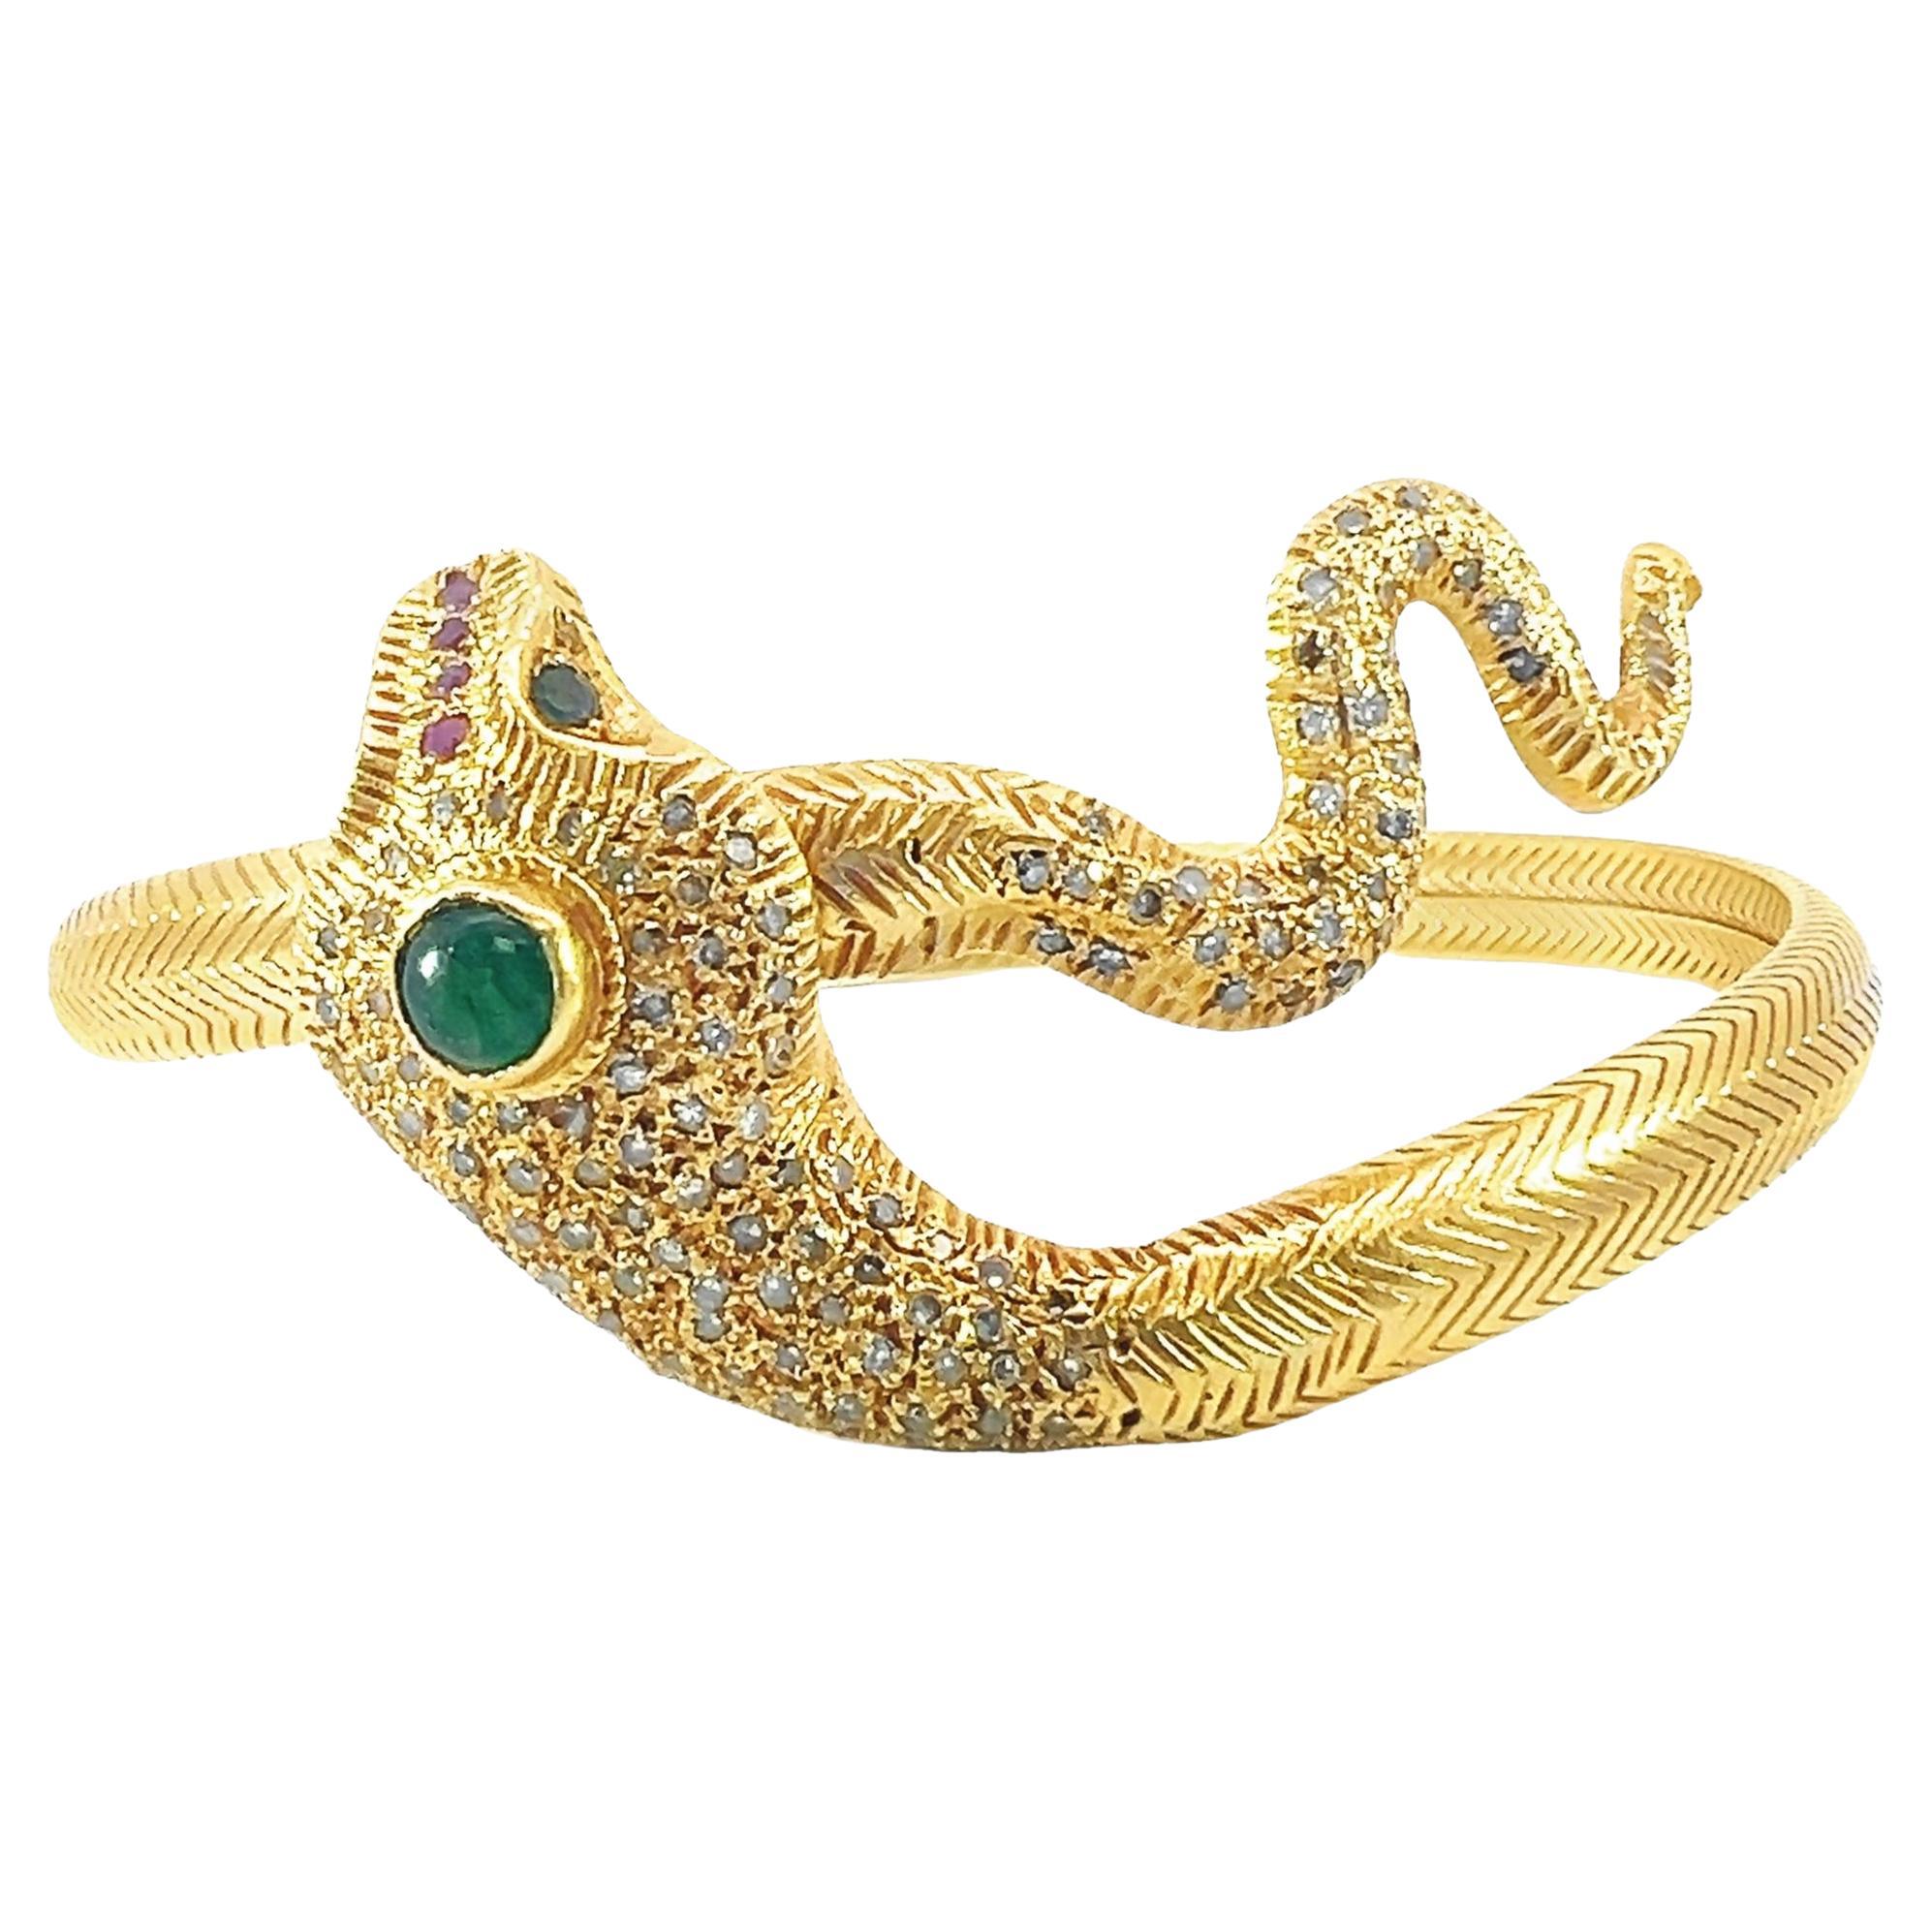 Beautiful solid gold serpent bangle with diamond, emerald and ruby